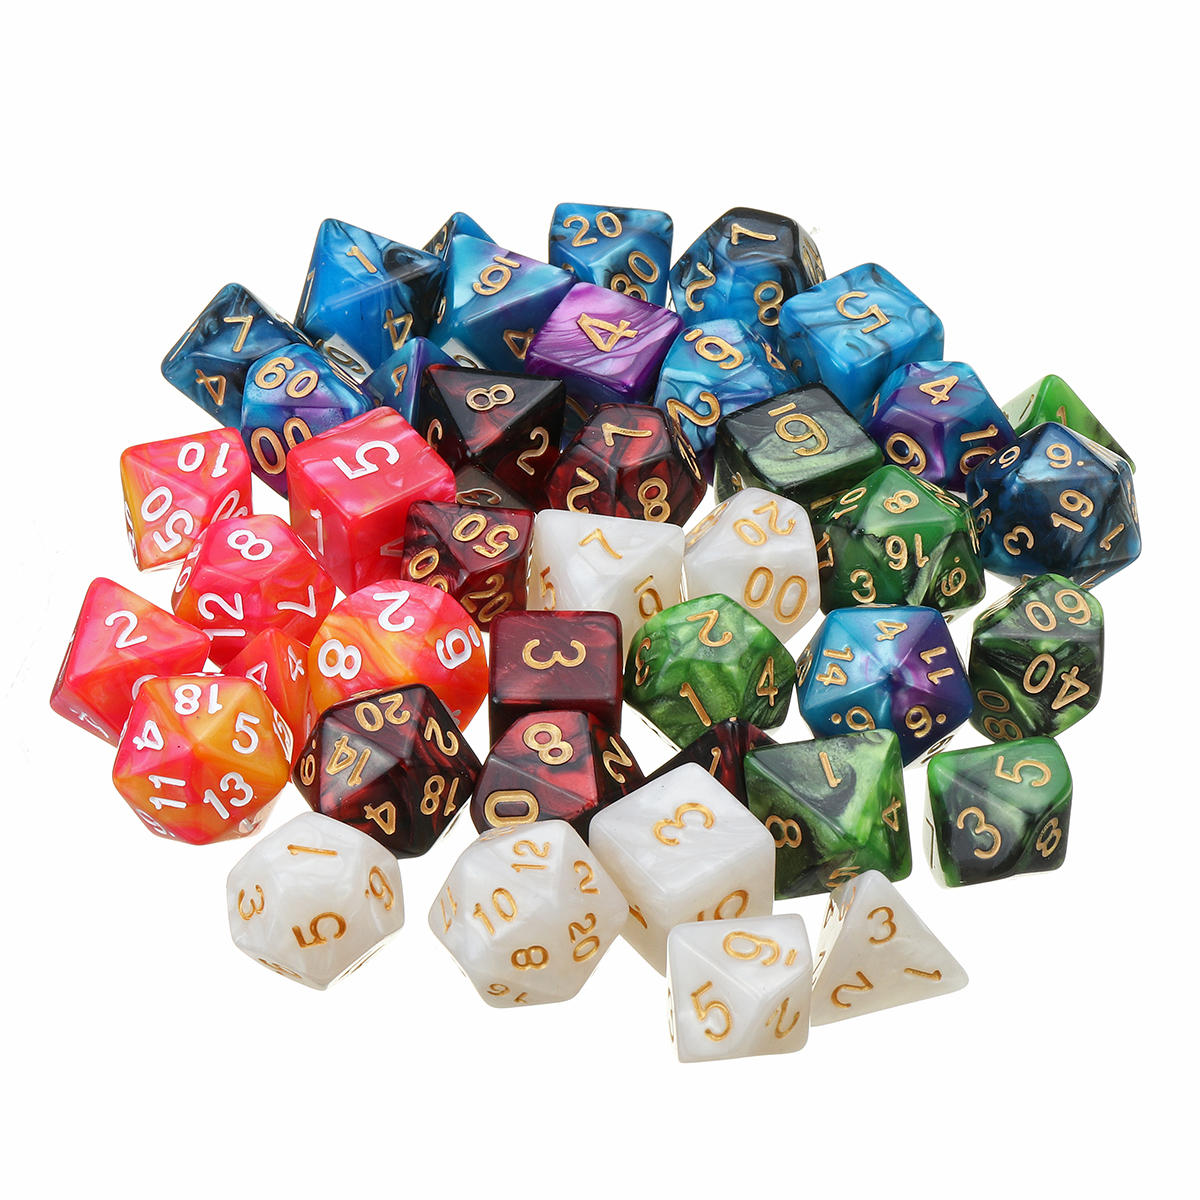 Bag for DND RPG MTG Role Playing Board Game 42pcs/Set Acrylic Polyhedral Dice 